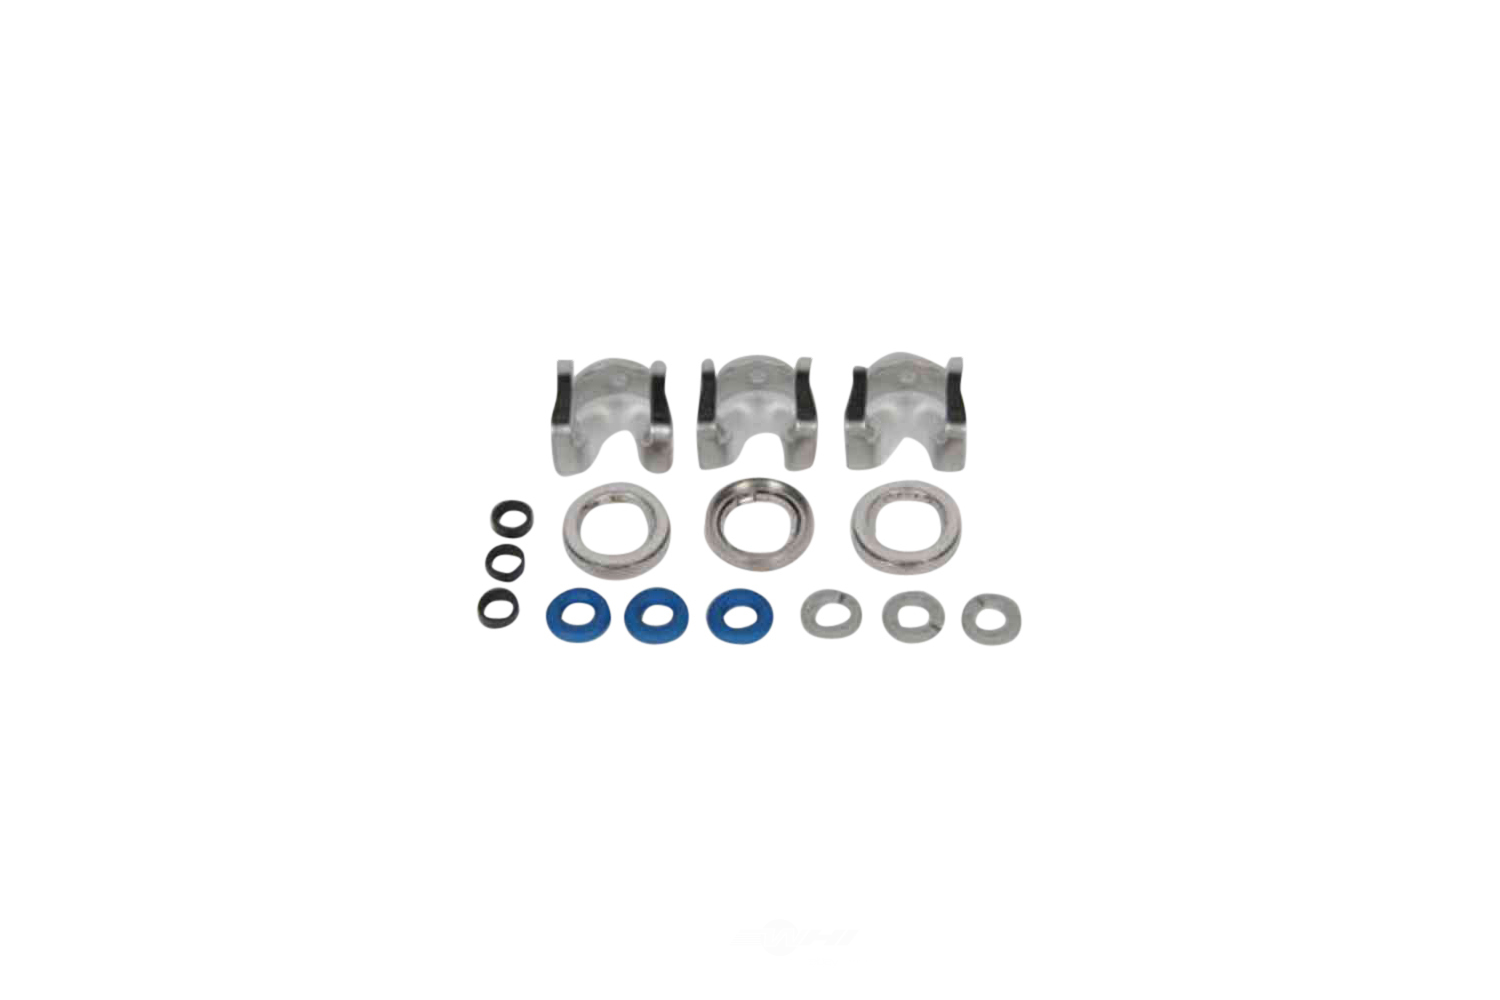 GM GENUINE PARTS CANADA - Fuel Injector Seal Kit - GMC 12644934